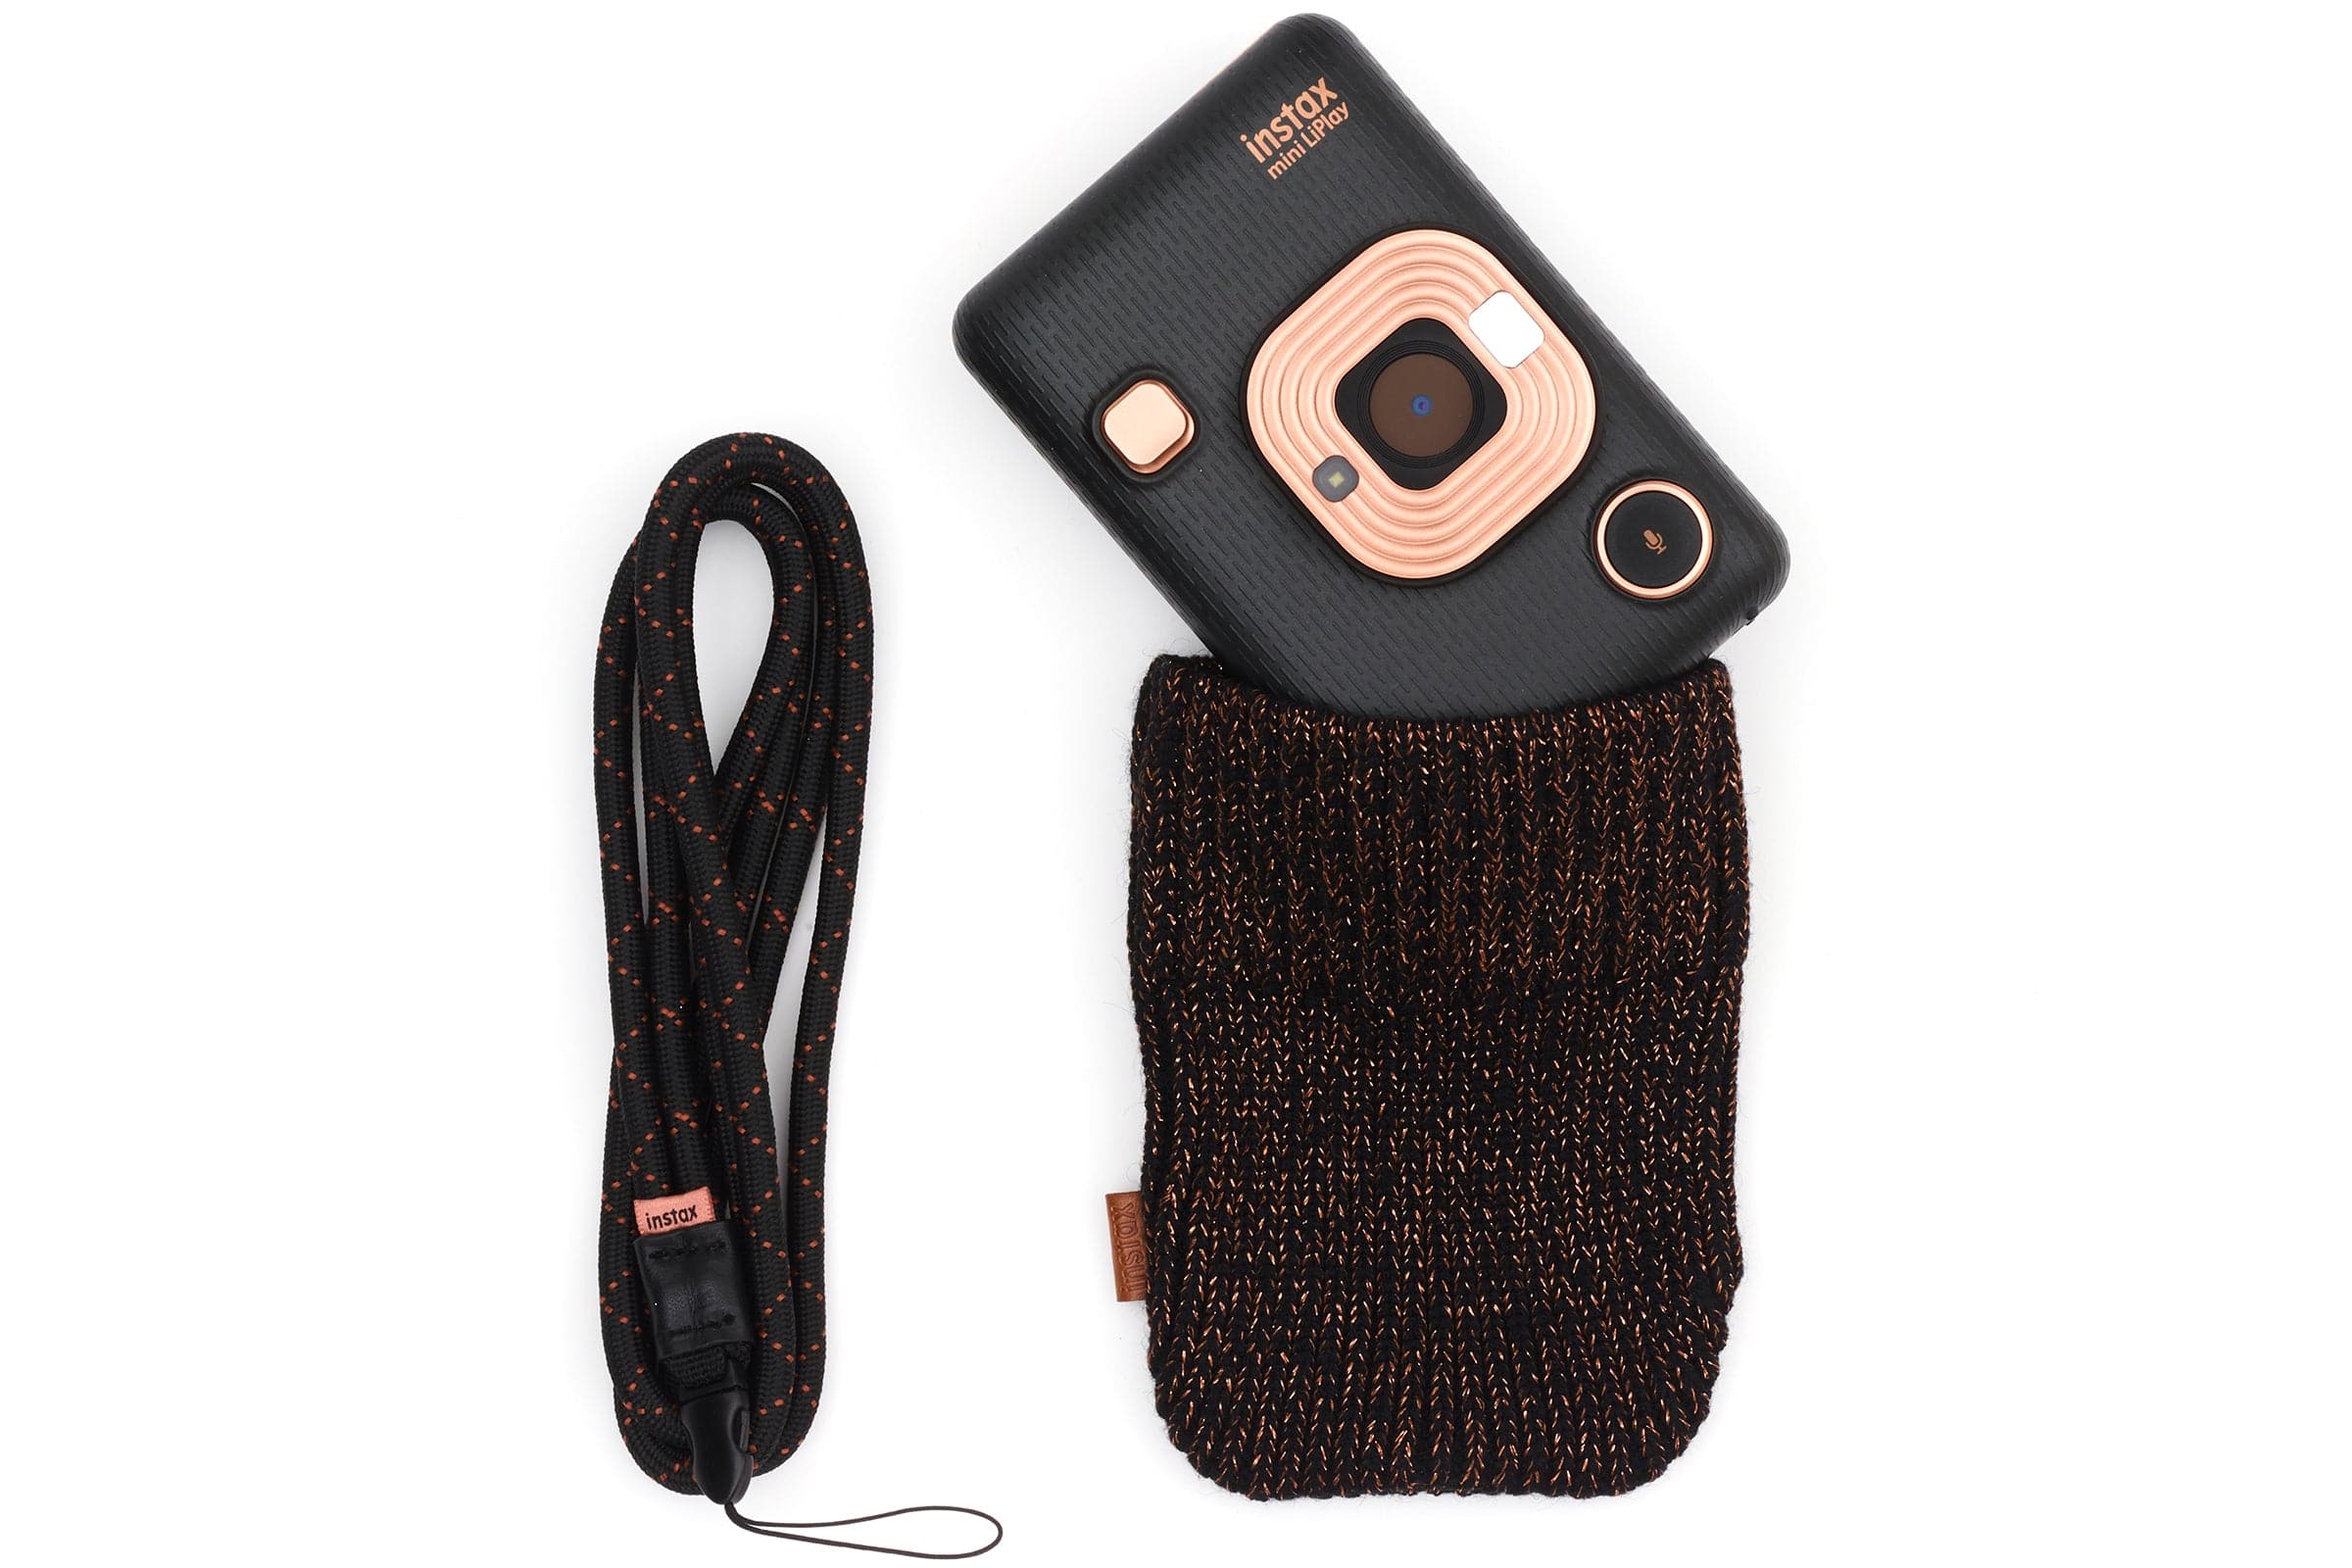 Fujifilm Instax Mini Liplay Accessory Kit with Neck Strap & Knitted Pouch - Elegant Black